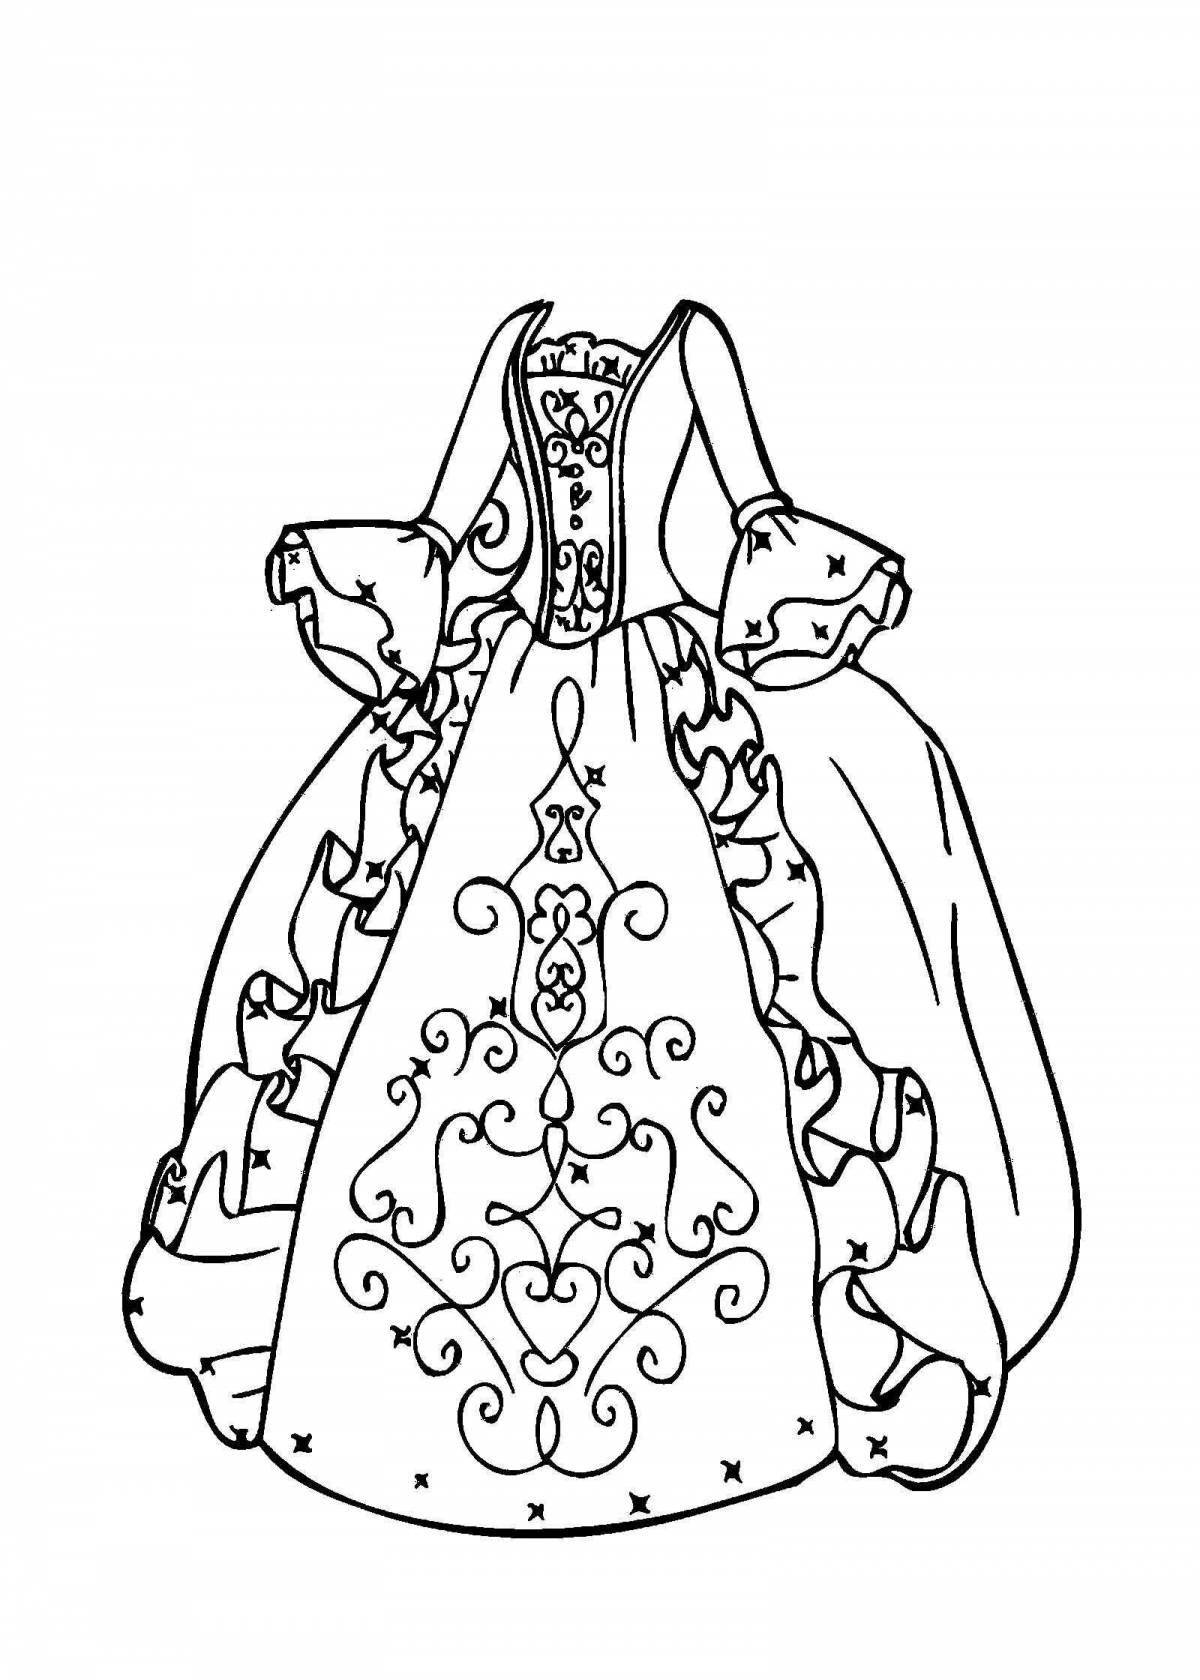 Coloring book shining dress for children